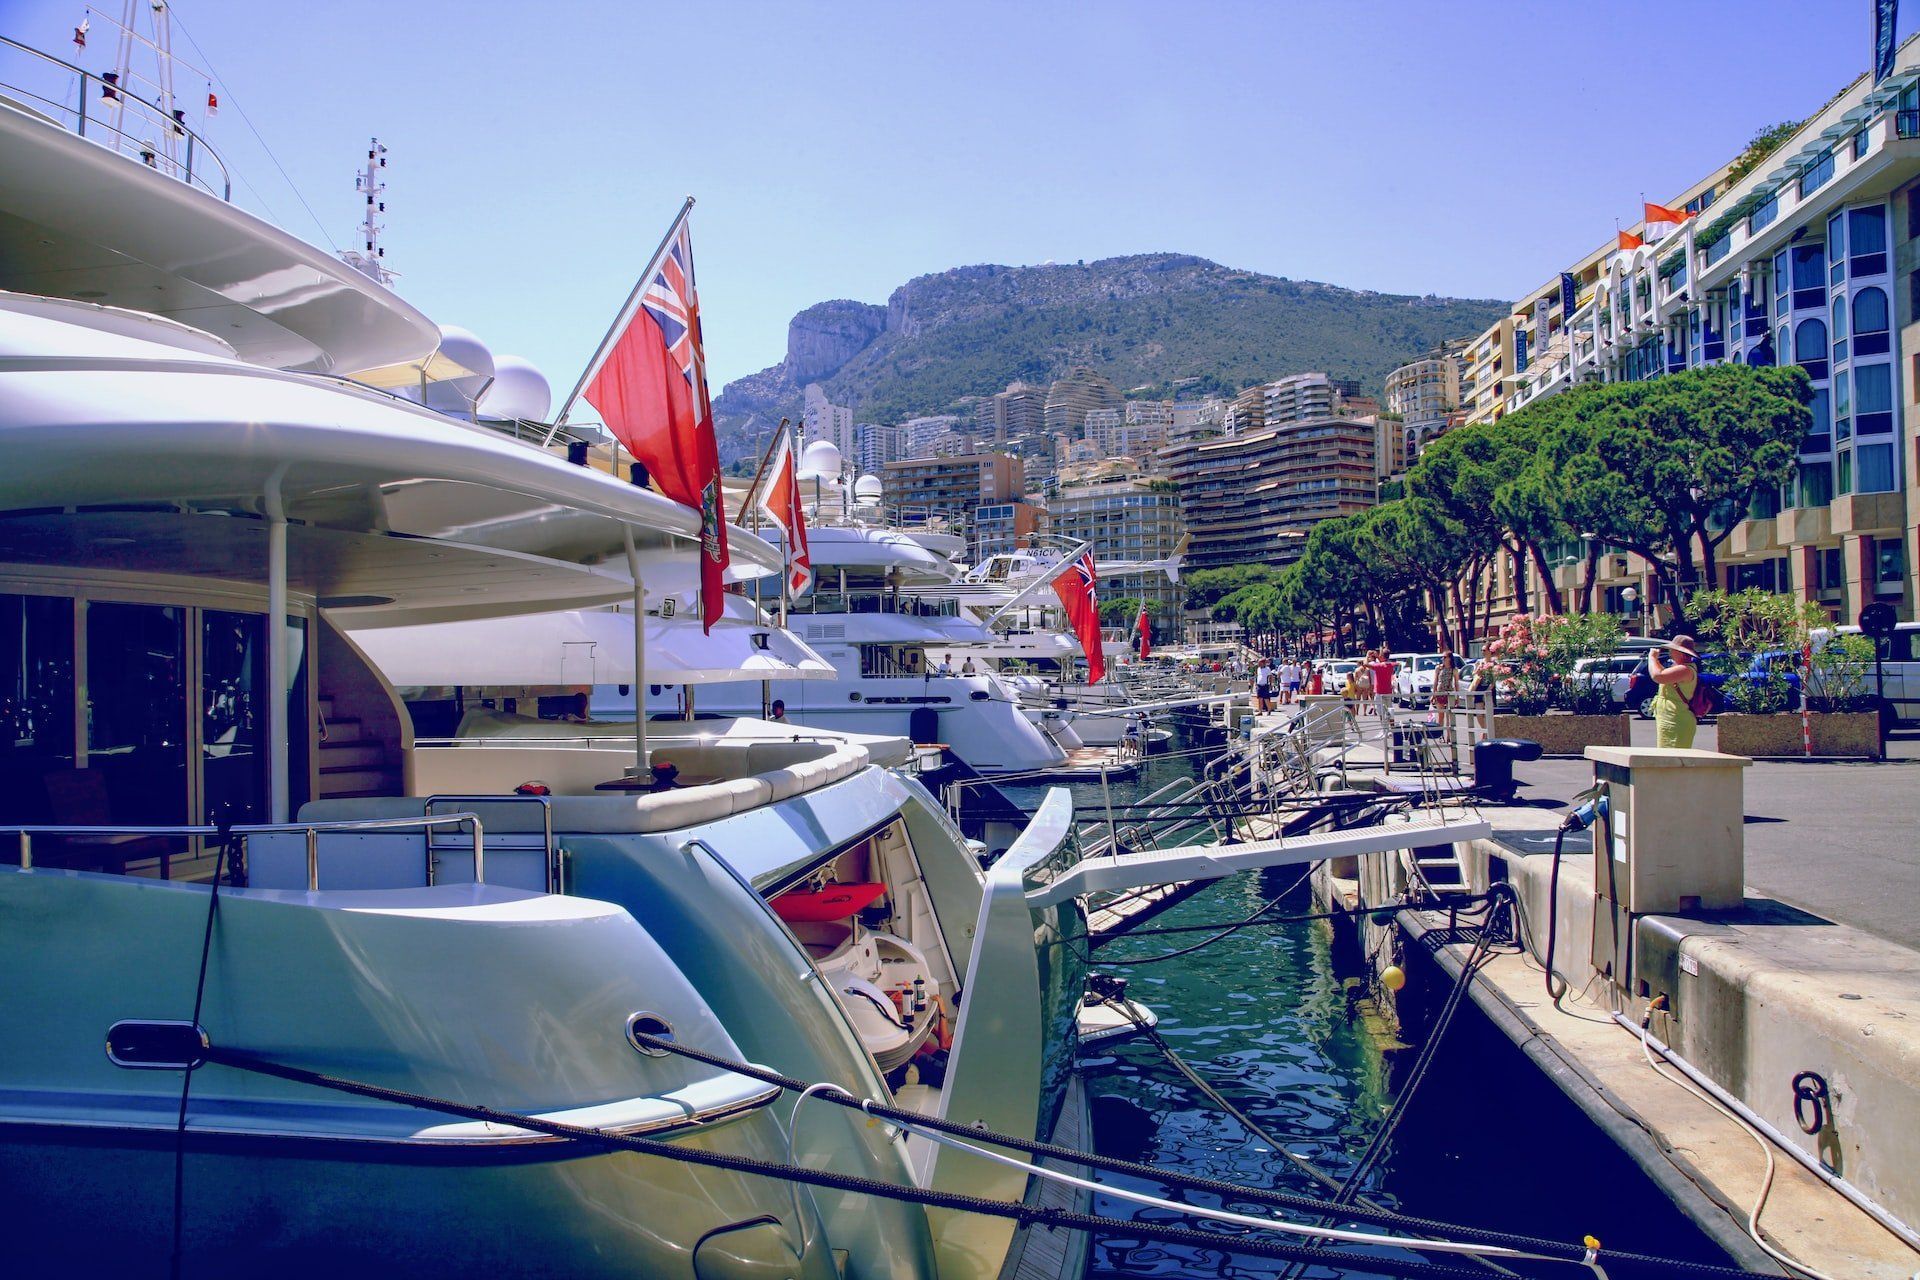 a large yacht is docked in a harbor with mountains in the background